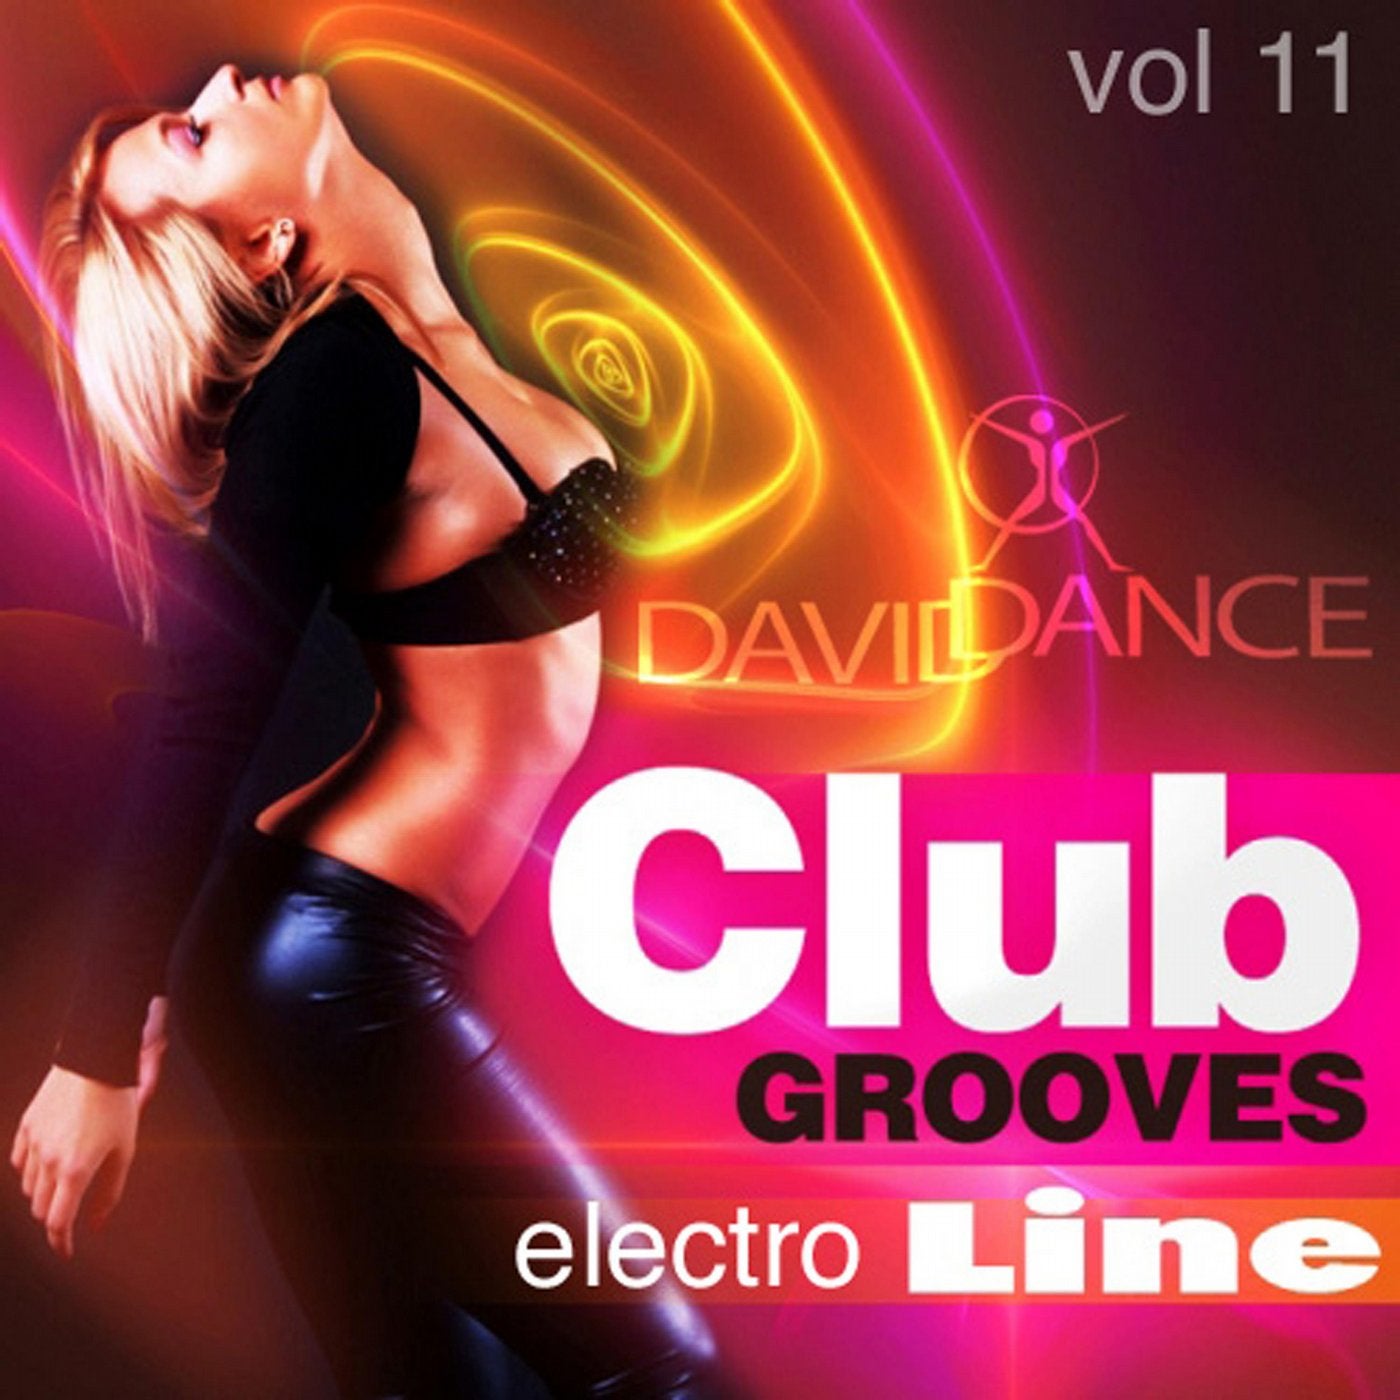 CLUB GROOVES - ELECTRO LINE Vol 11